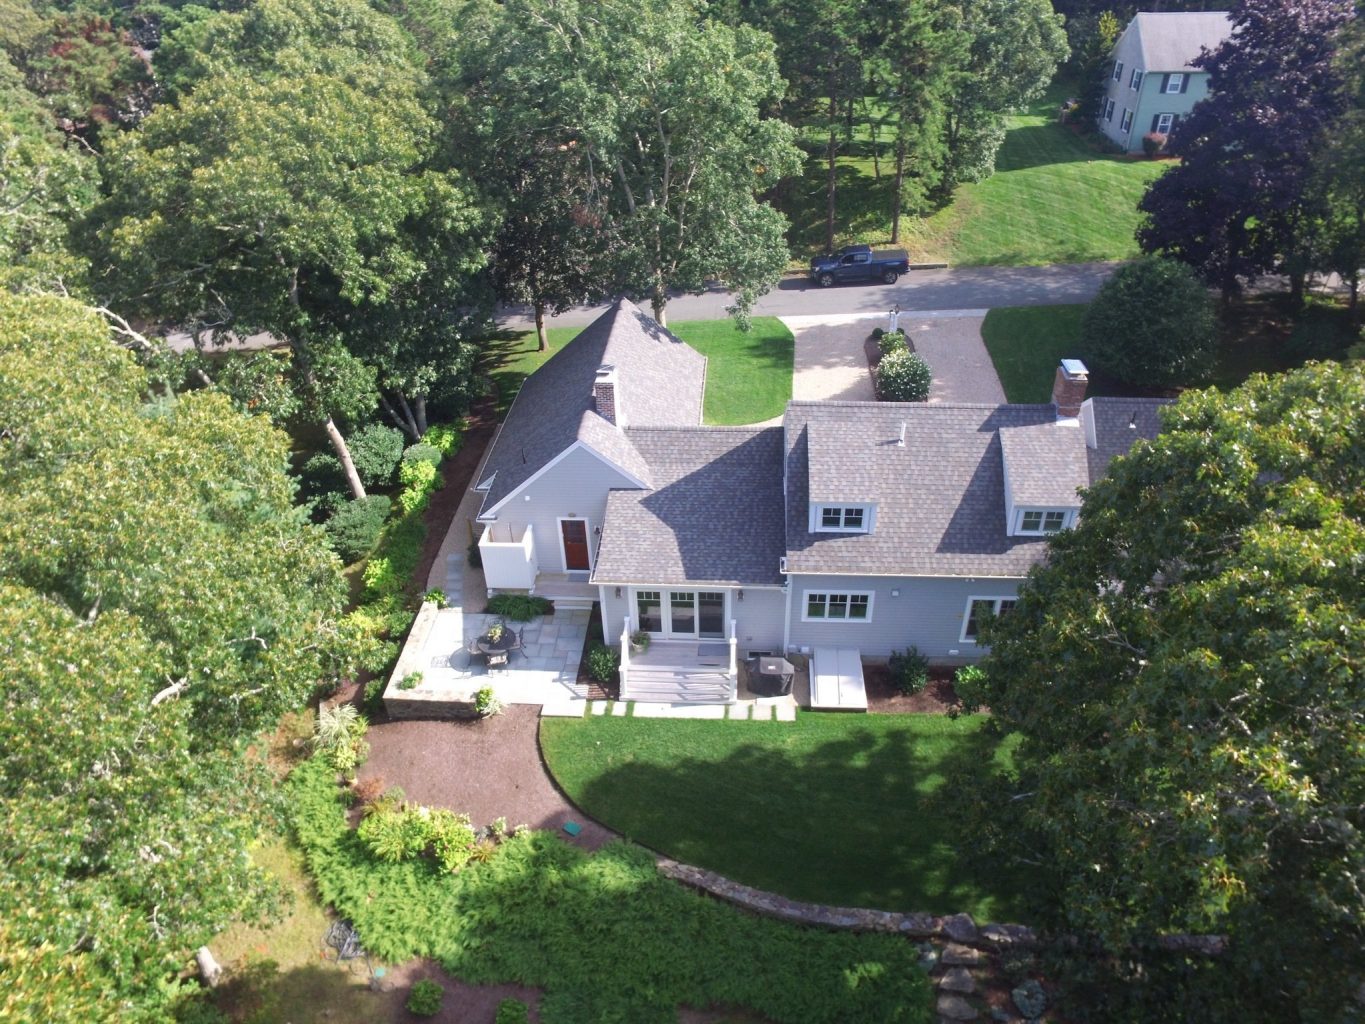 Arial view of a large house